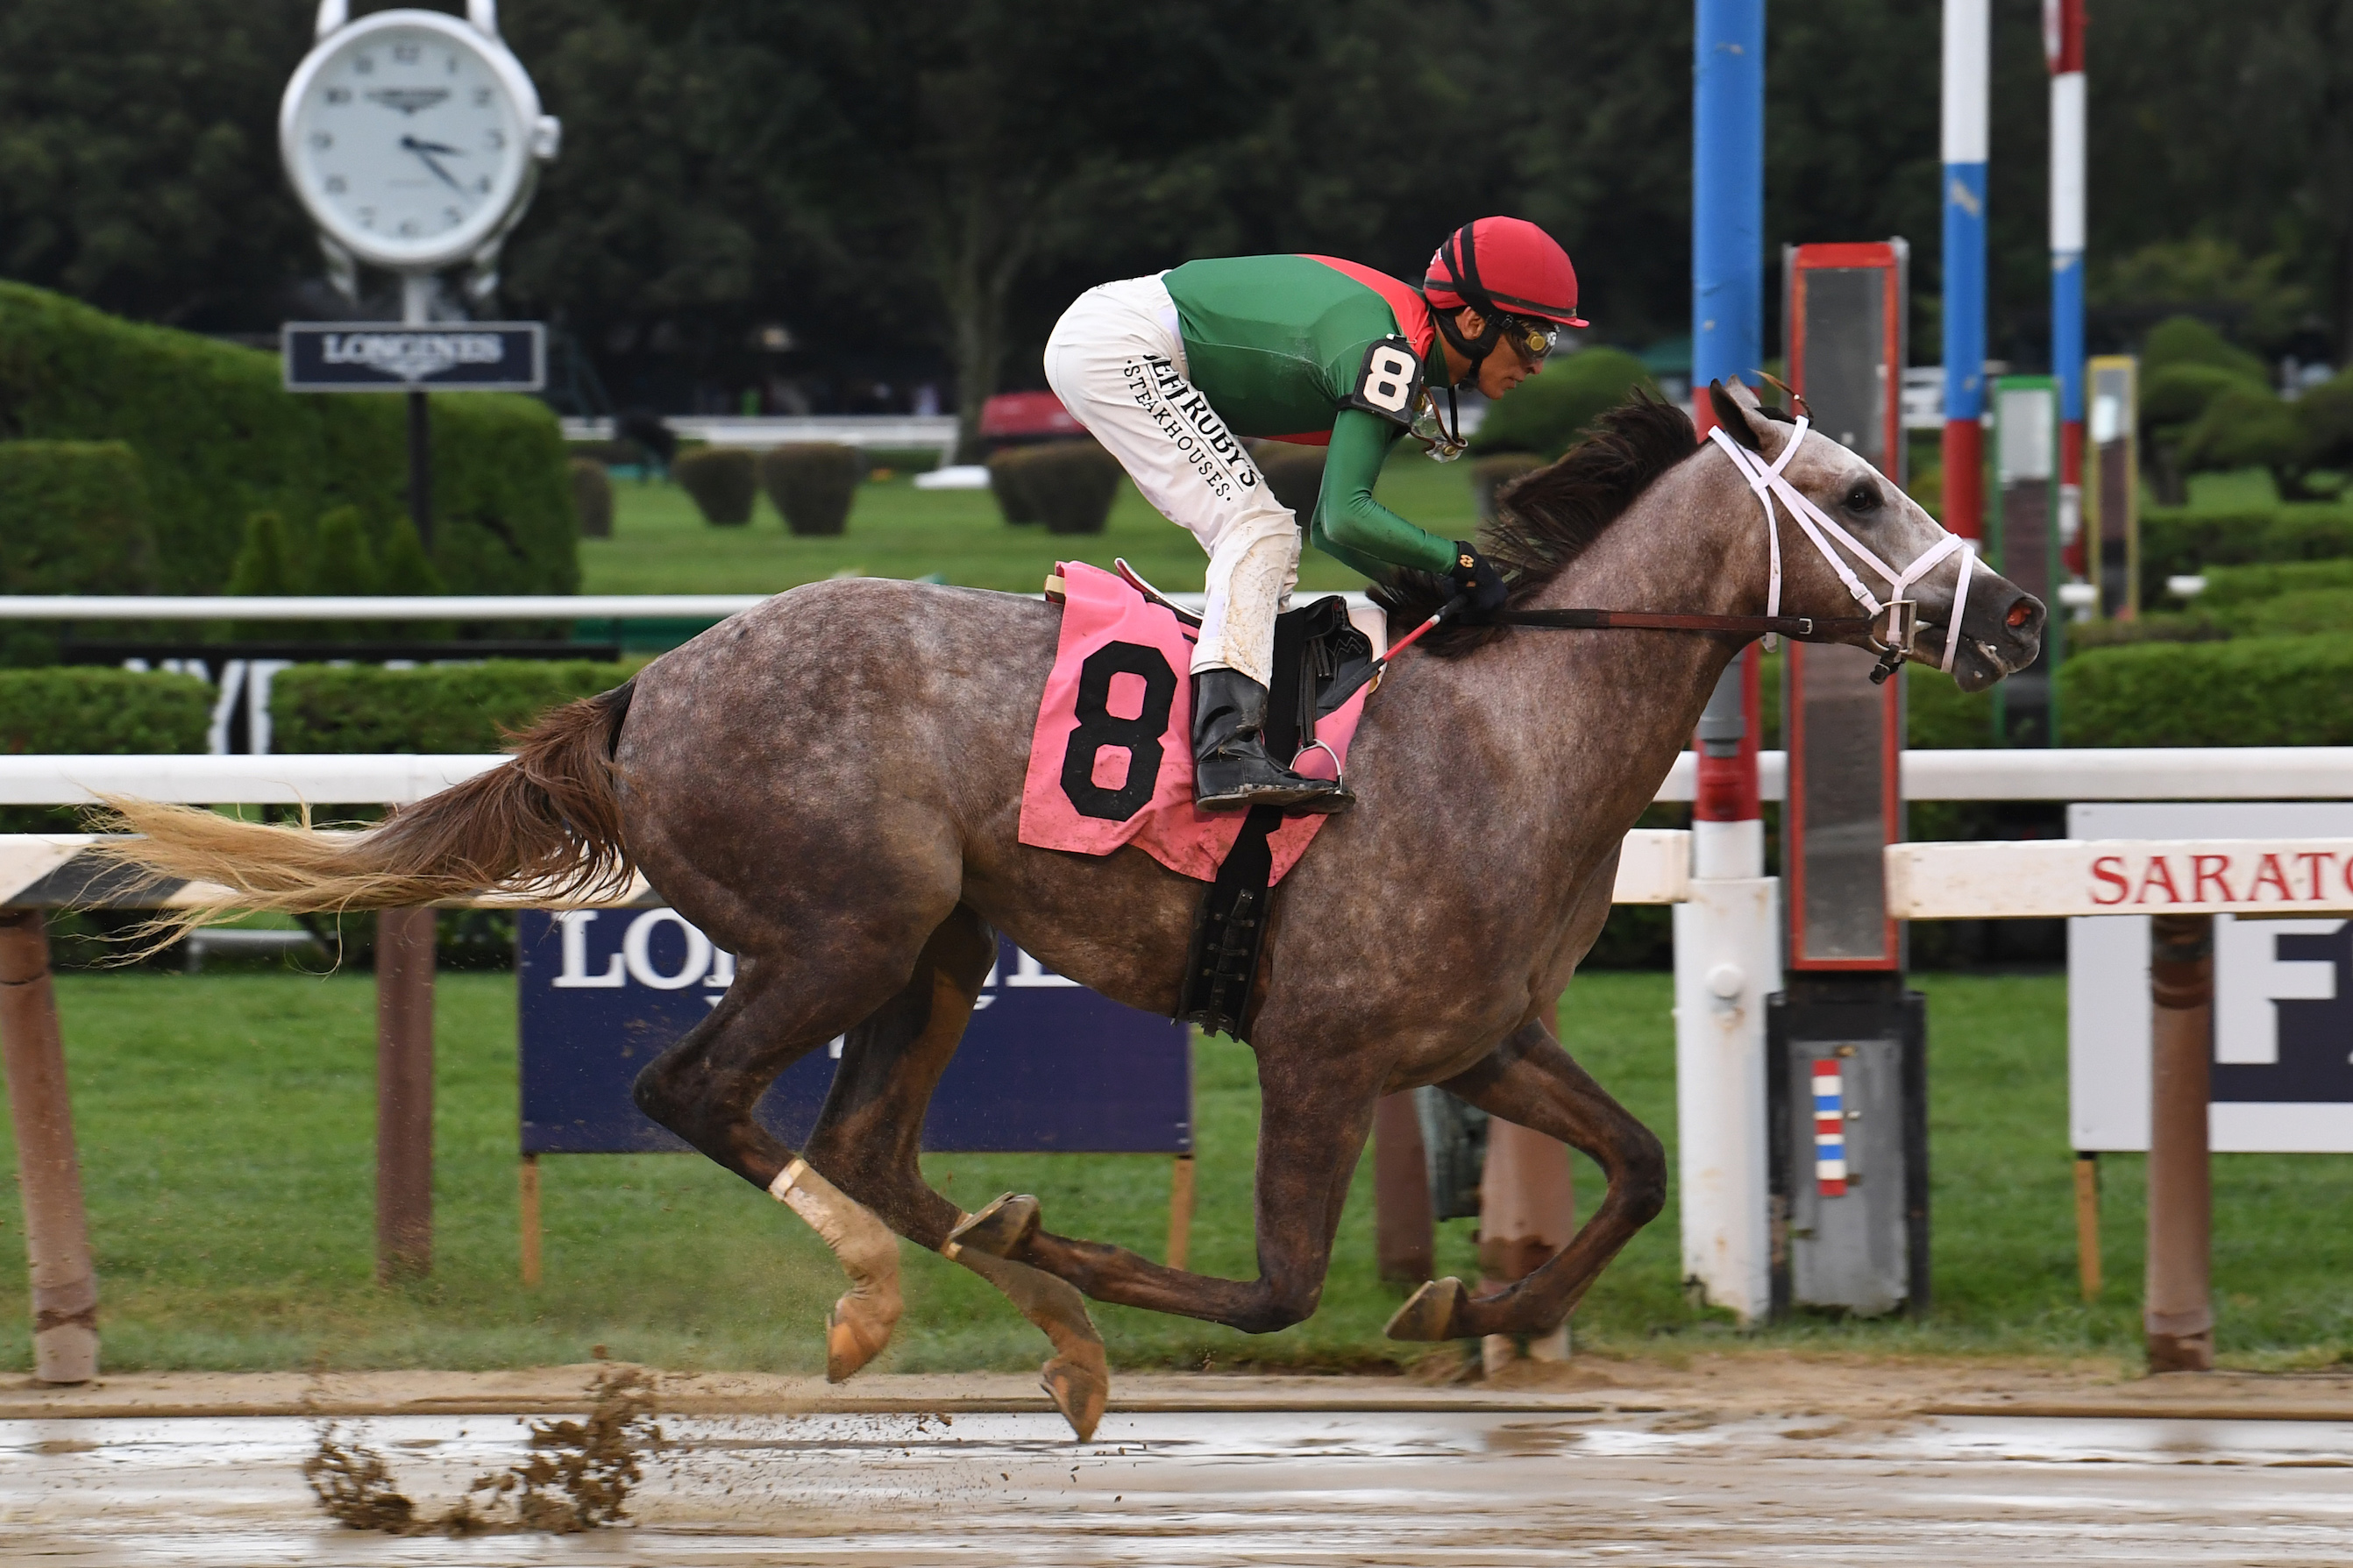 Gouverneur Morris: Team Valor International picked up the Kentucky Derby prospect at Fasig Tipton’s breeze-up sale last year. Photo: NYRA.com